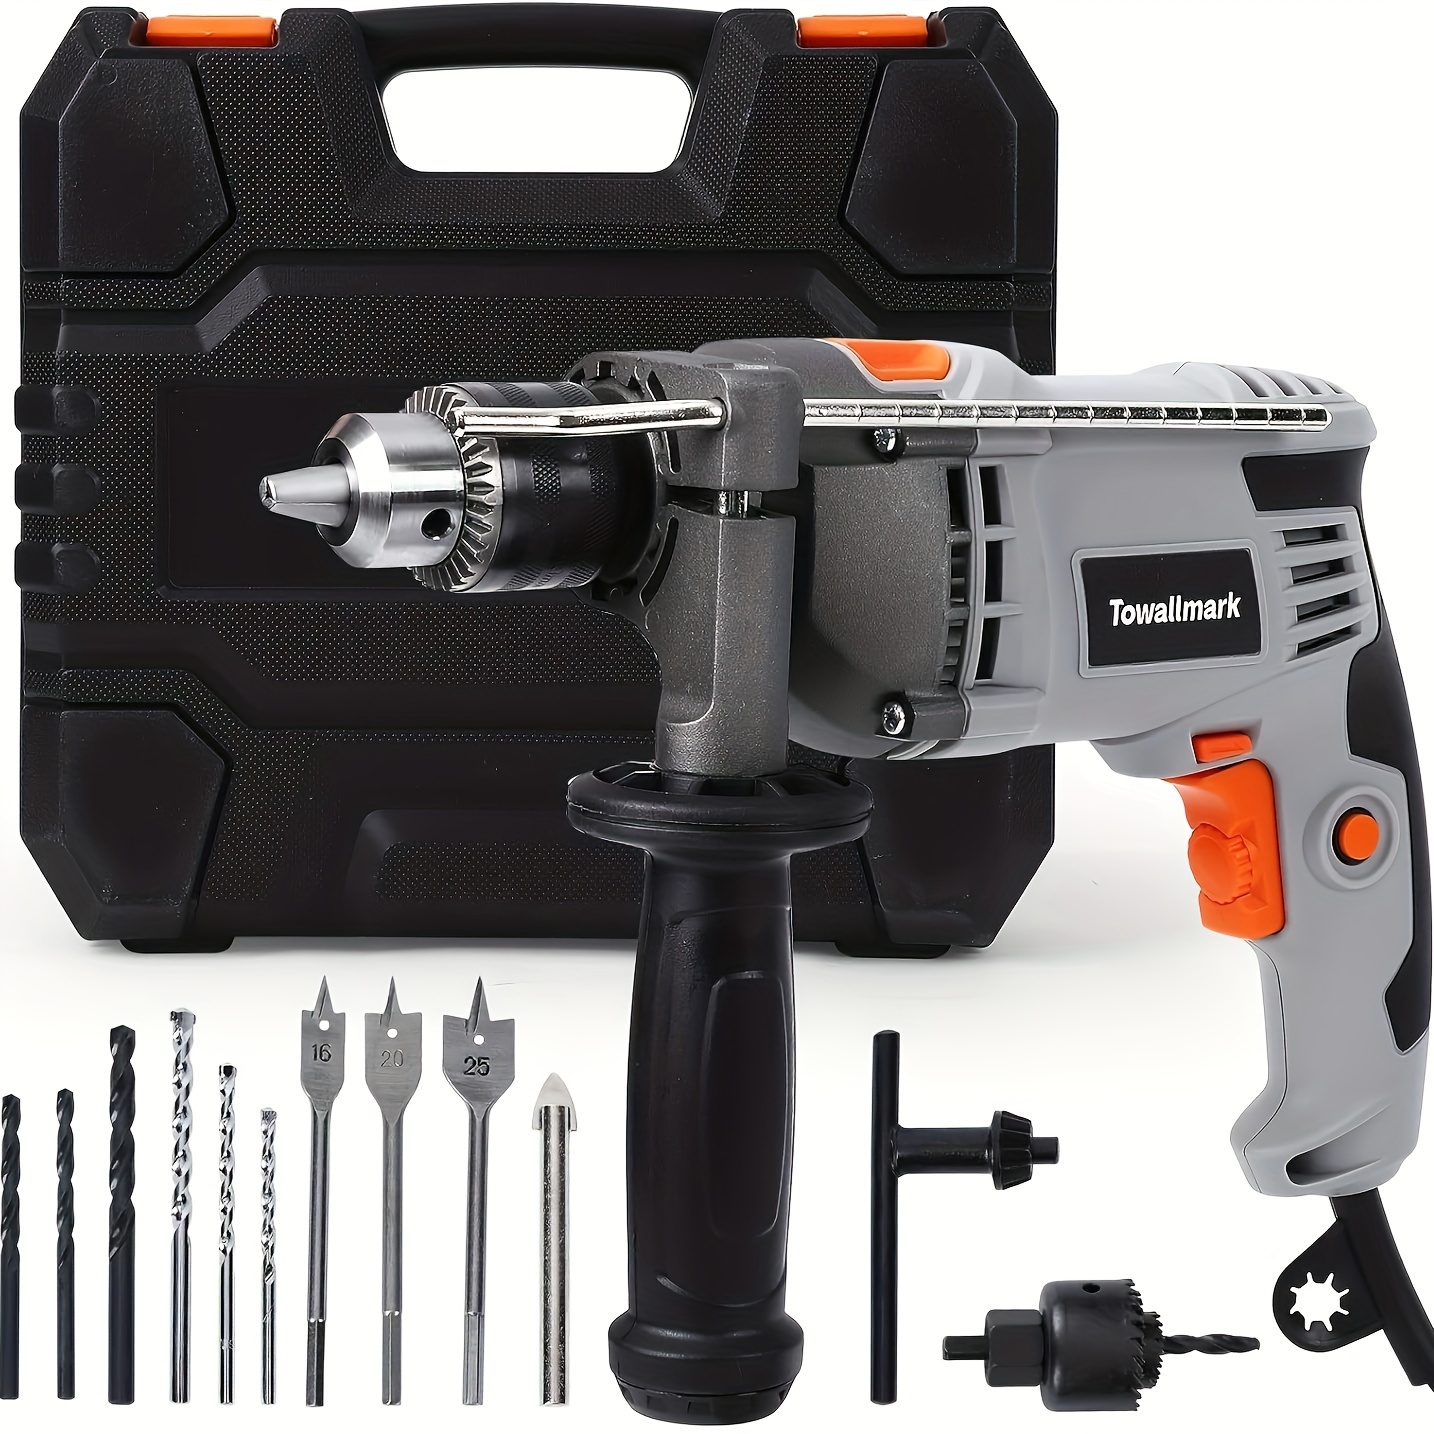 

7.5a Hammer Drill W/ Aluminum Alloy Housing, Storage Toolbox, Variable Speed, 3000rpm, 15 Drill Bits, 1/2-inch Corded, For Home Improvement, Diy Tool